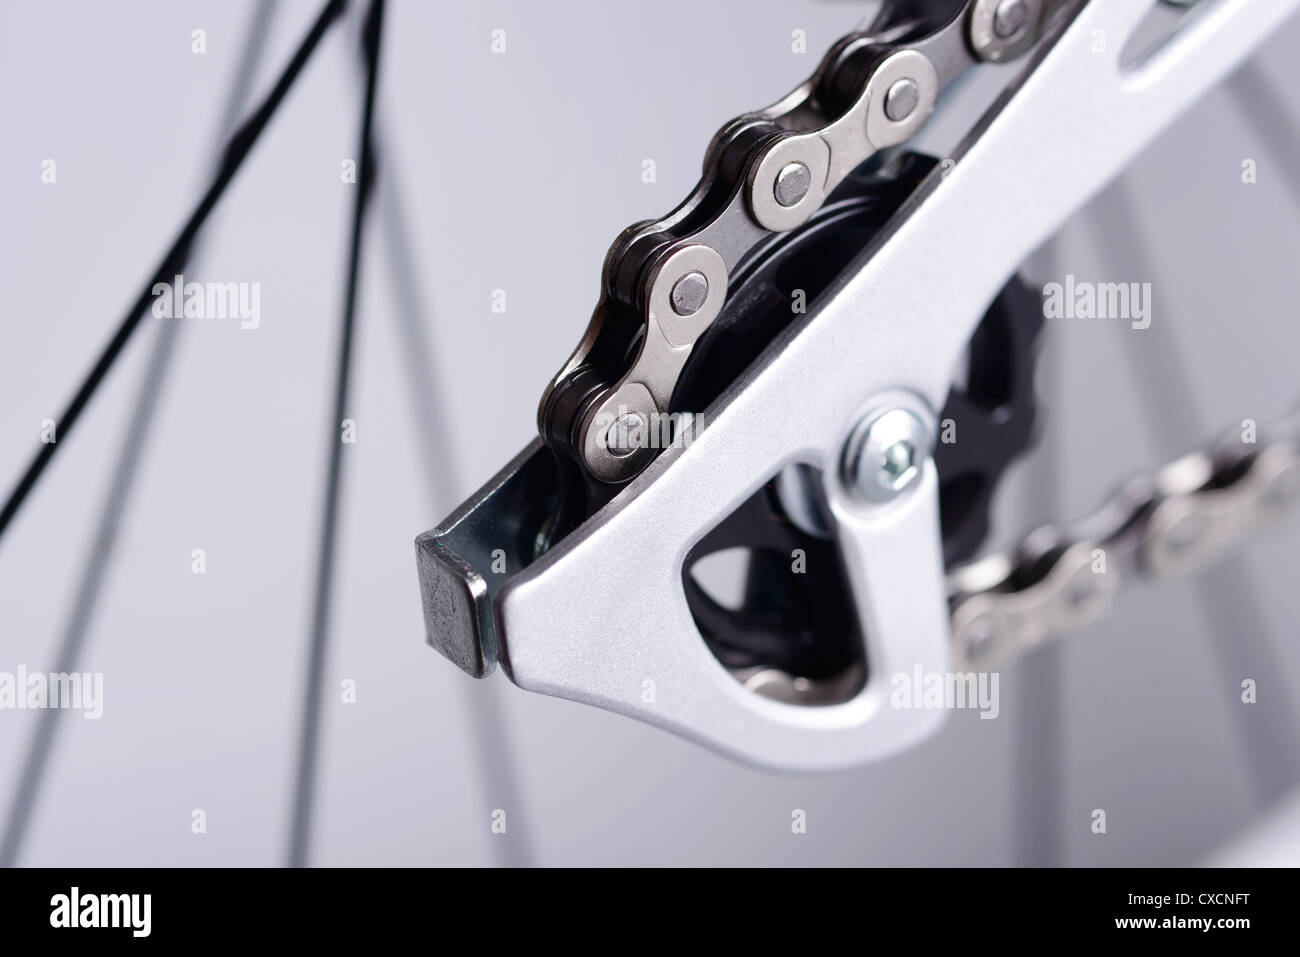 Bicycle rear derailleur close up detail Stock Photo